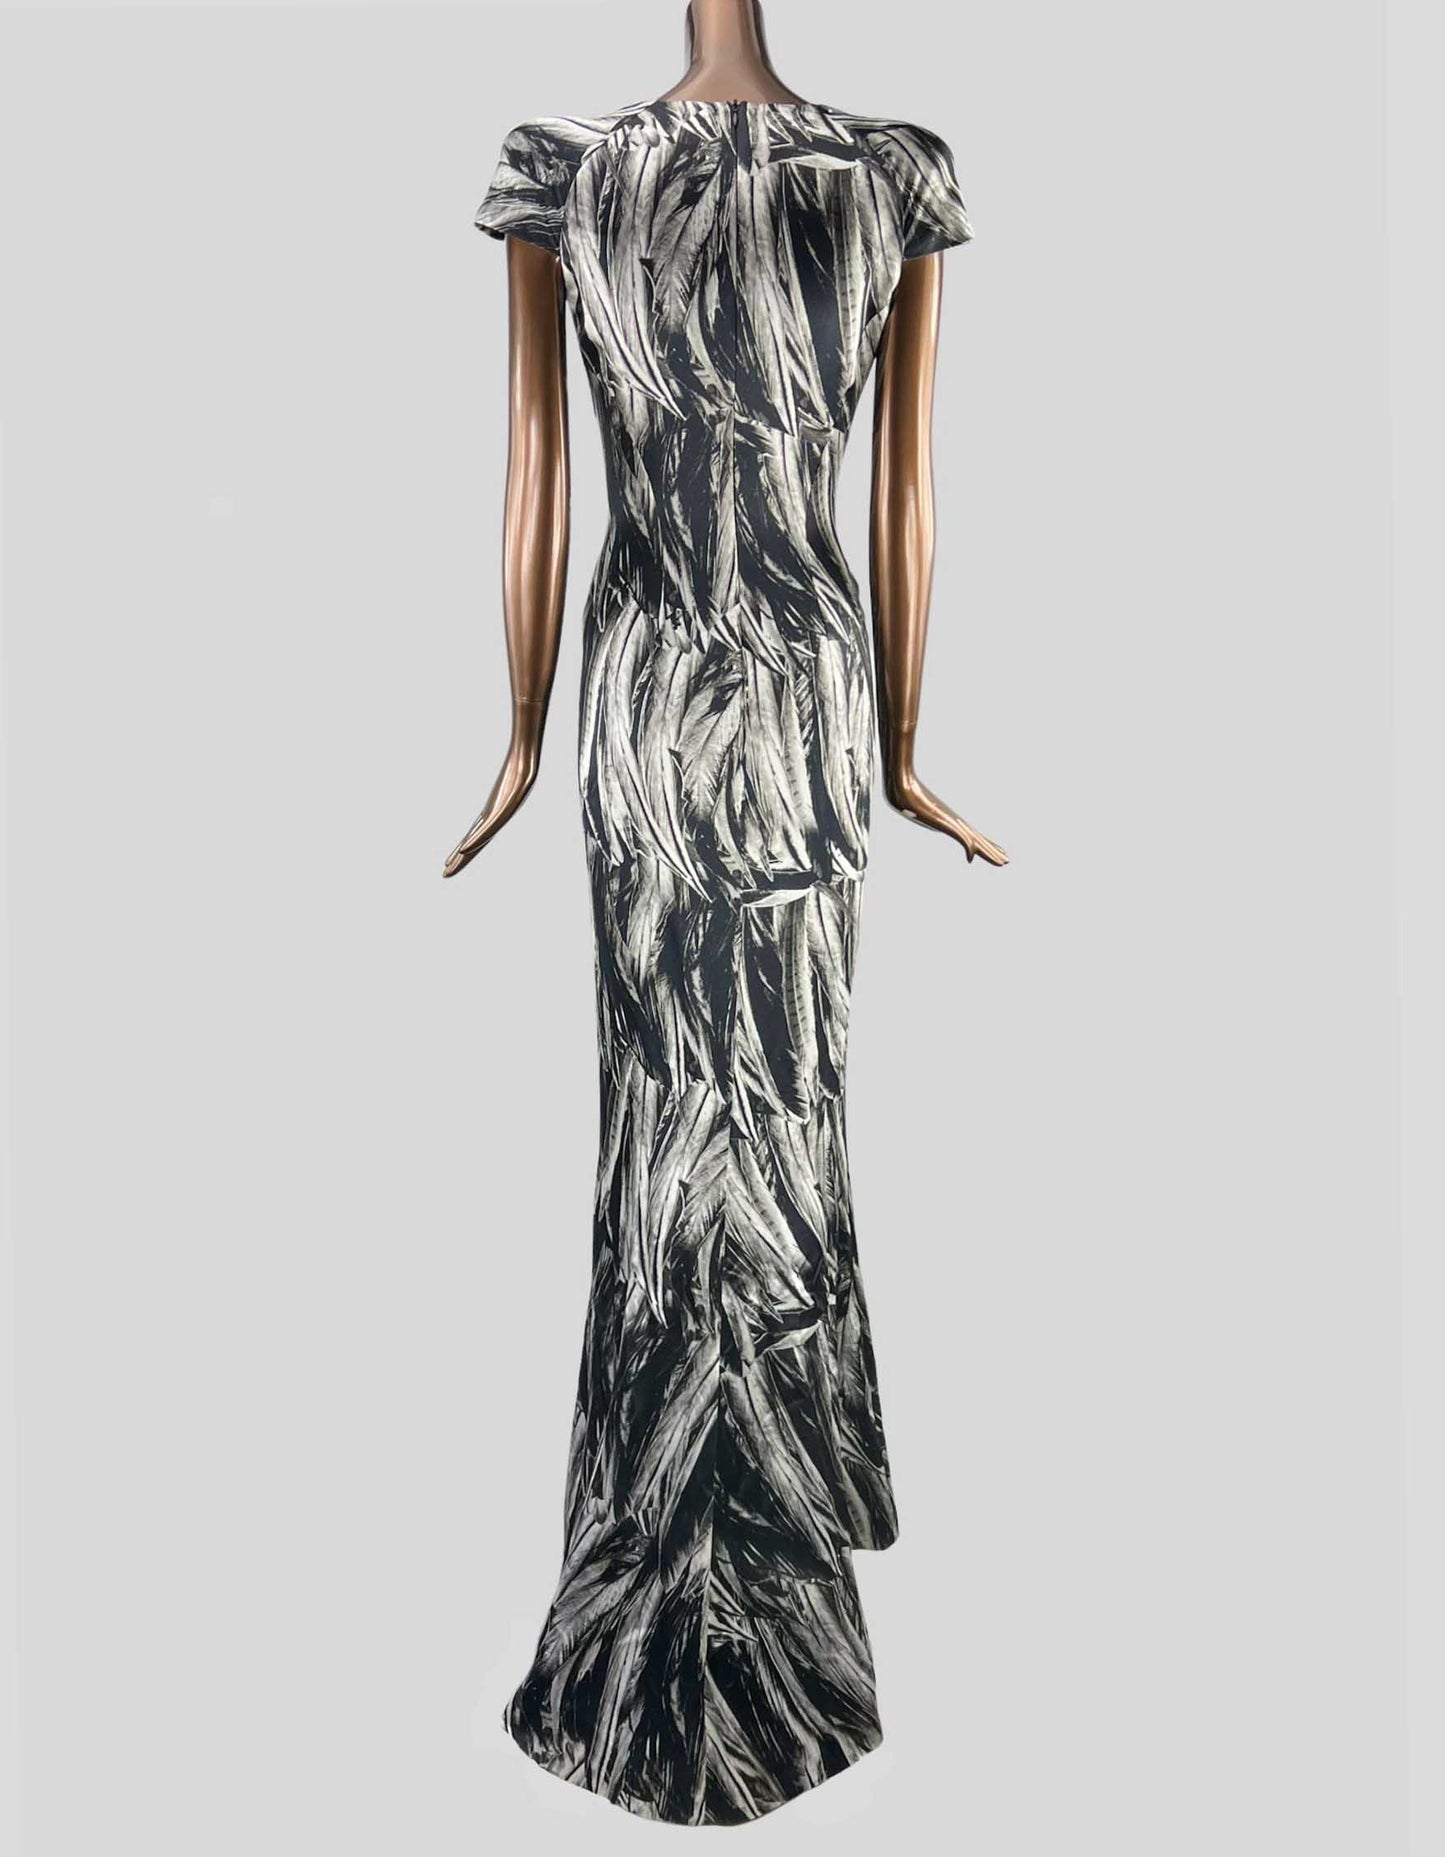 Alexander McQueen Feather Gown Spring 2008 la Dame Blue Collection Tribute to Issabella Blow - 44 IT | 8 US